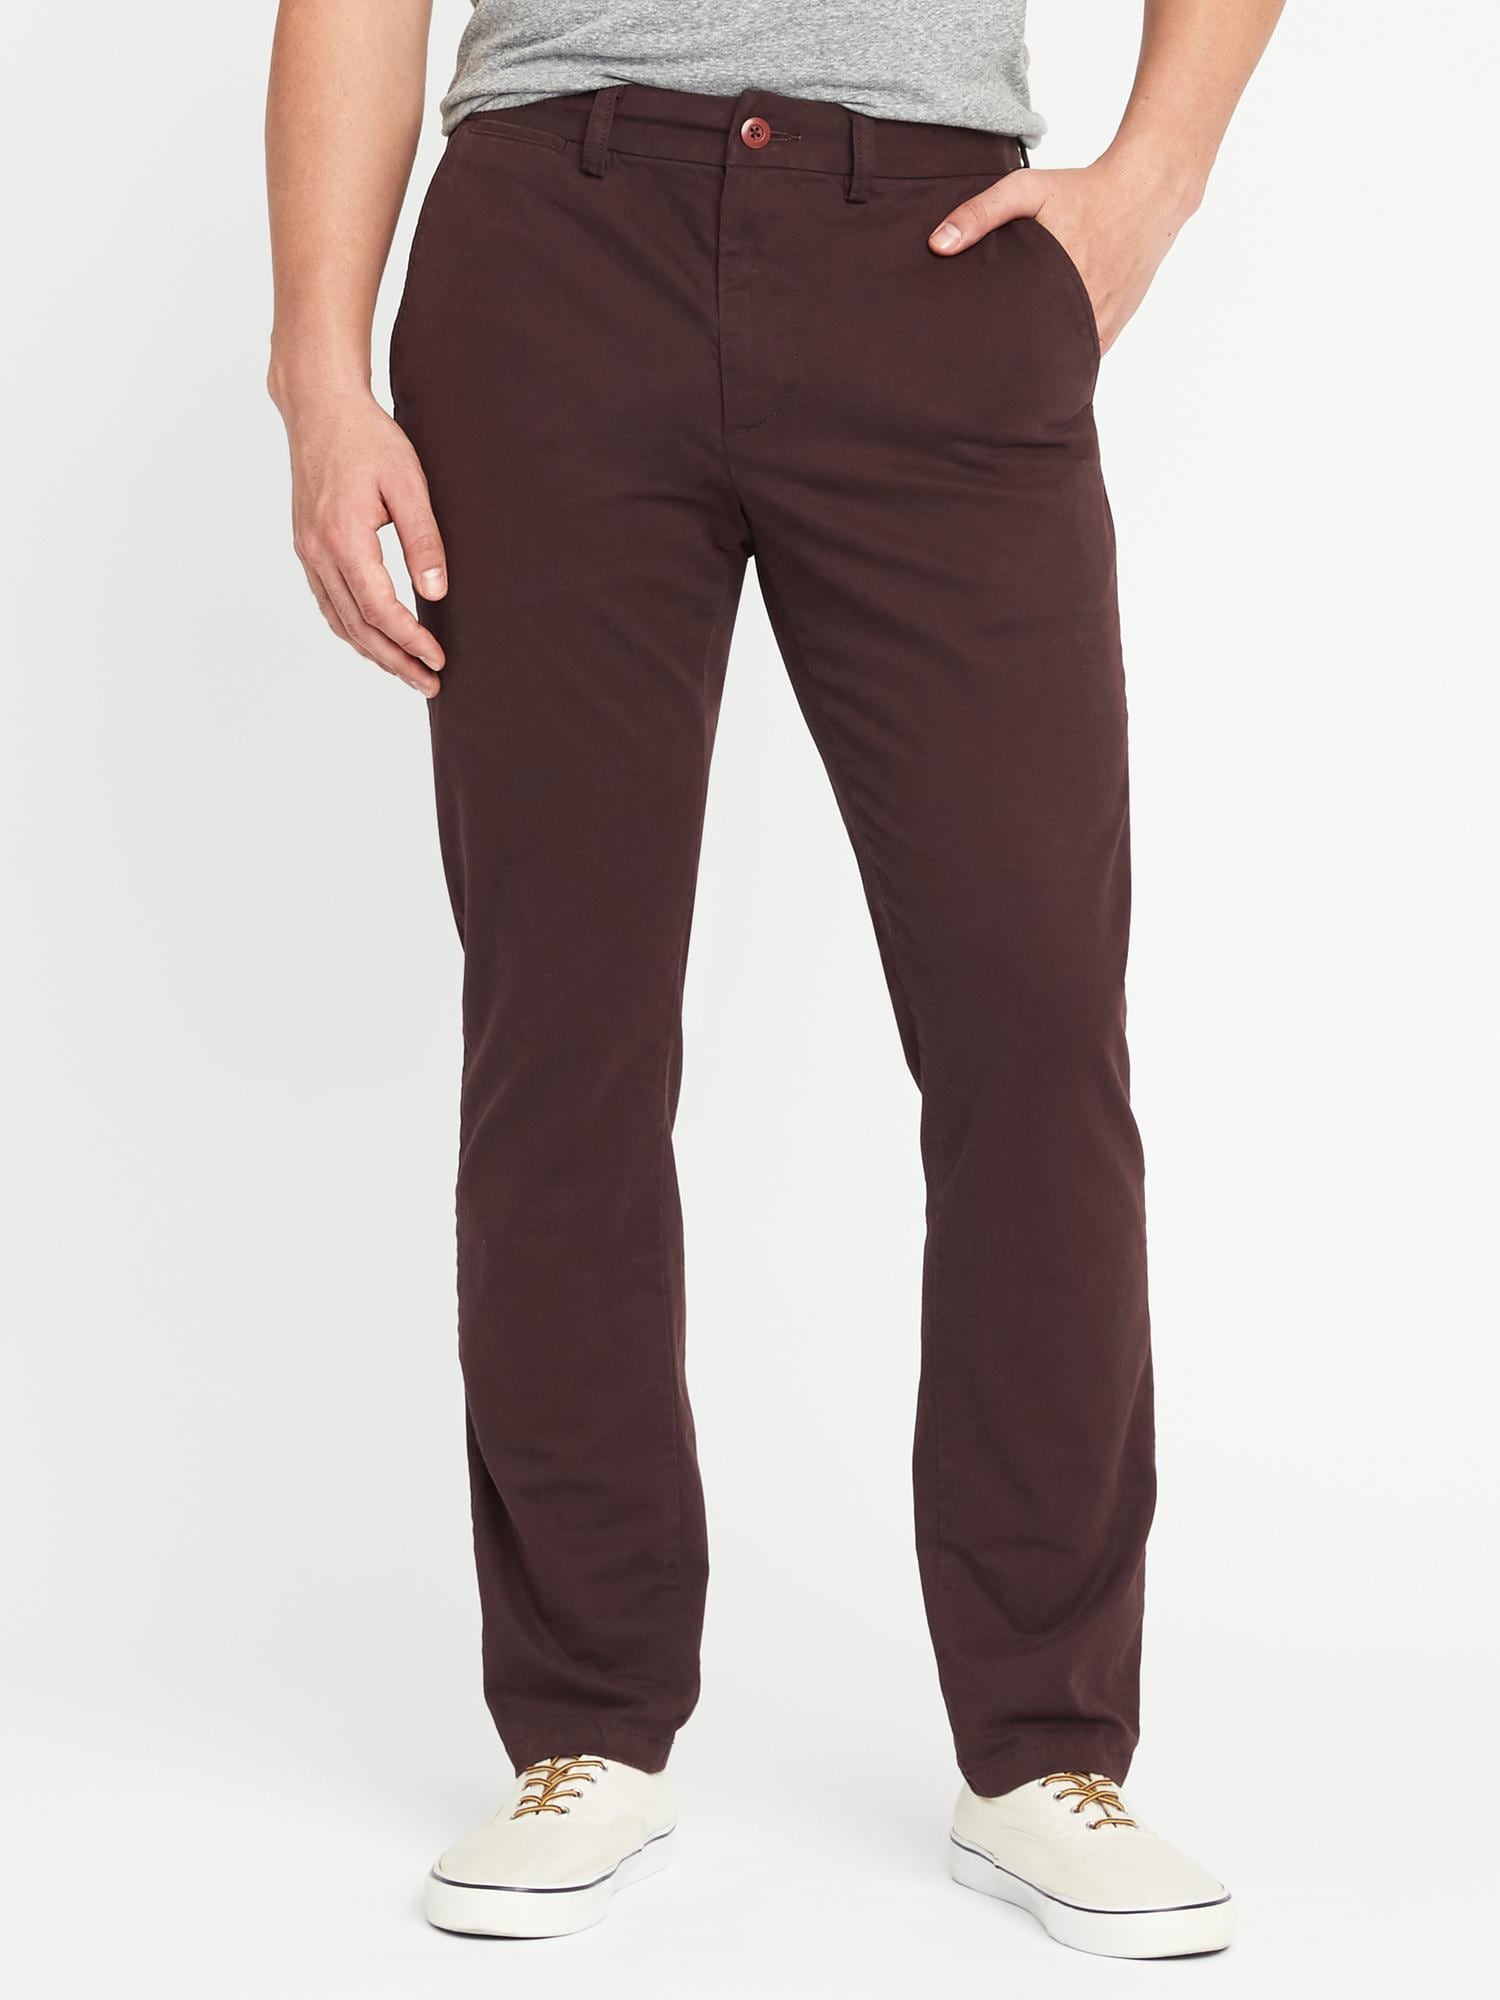 Athletic Ultimate Built-In Flex Chinos for Men | Old Navy